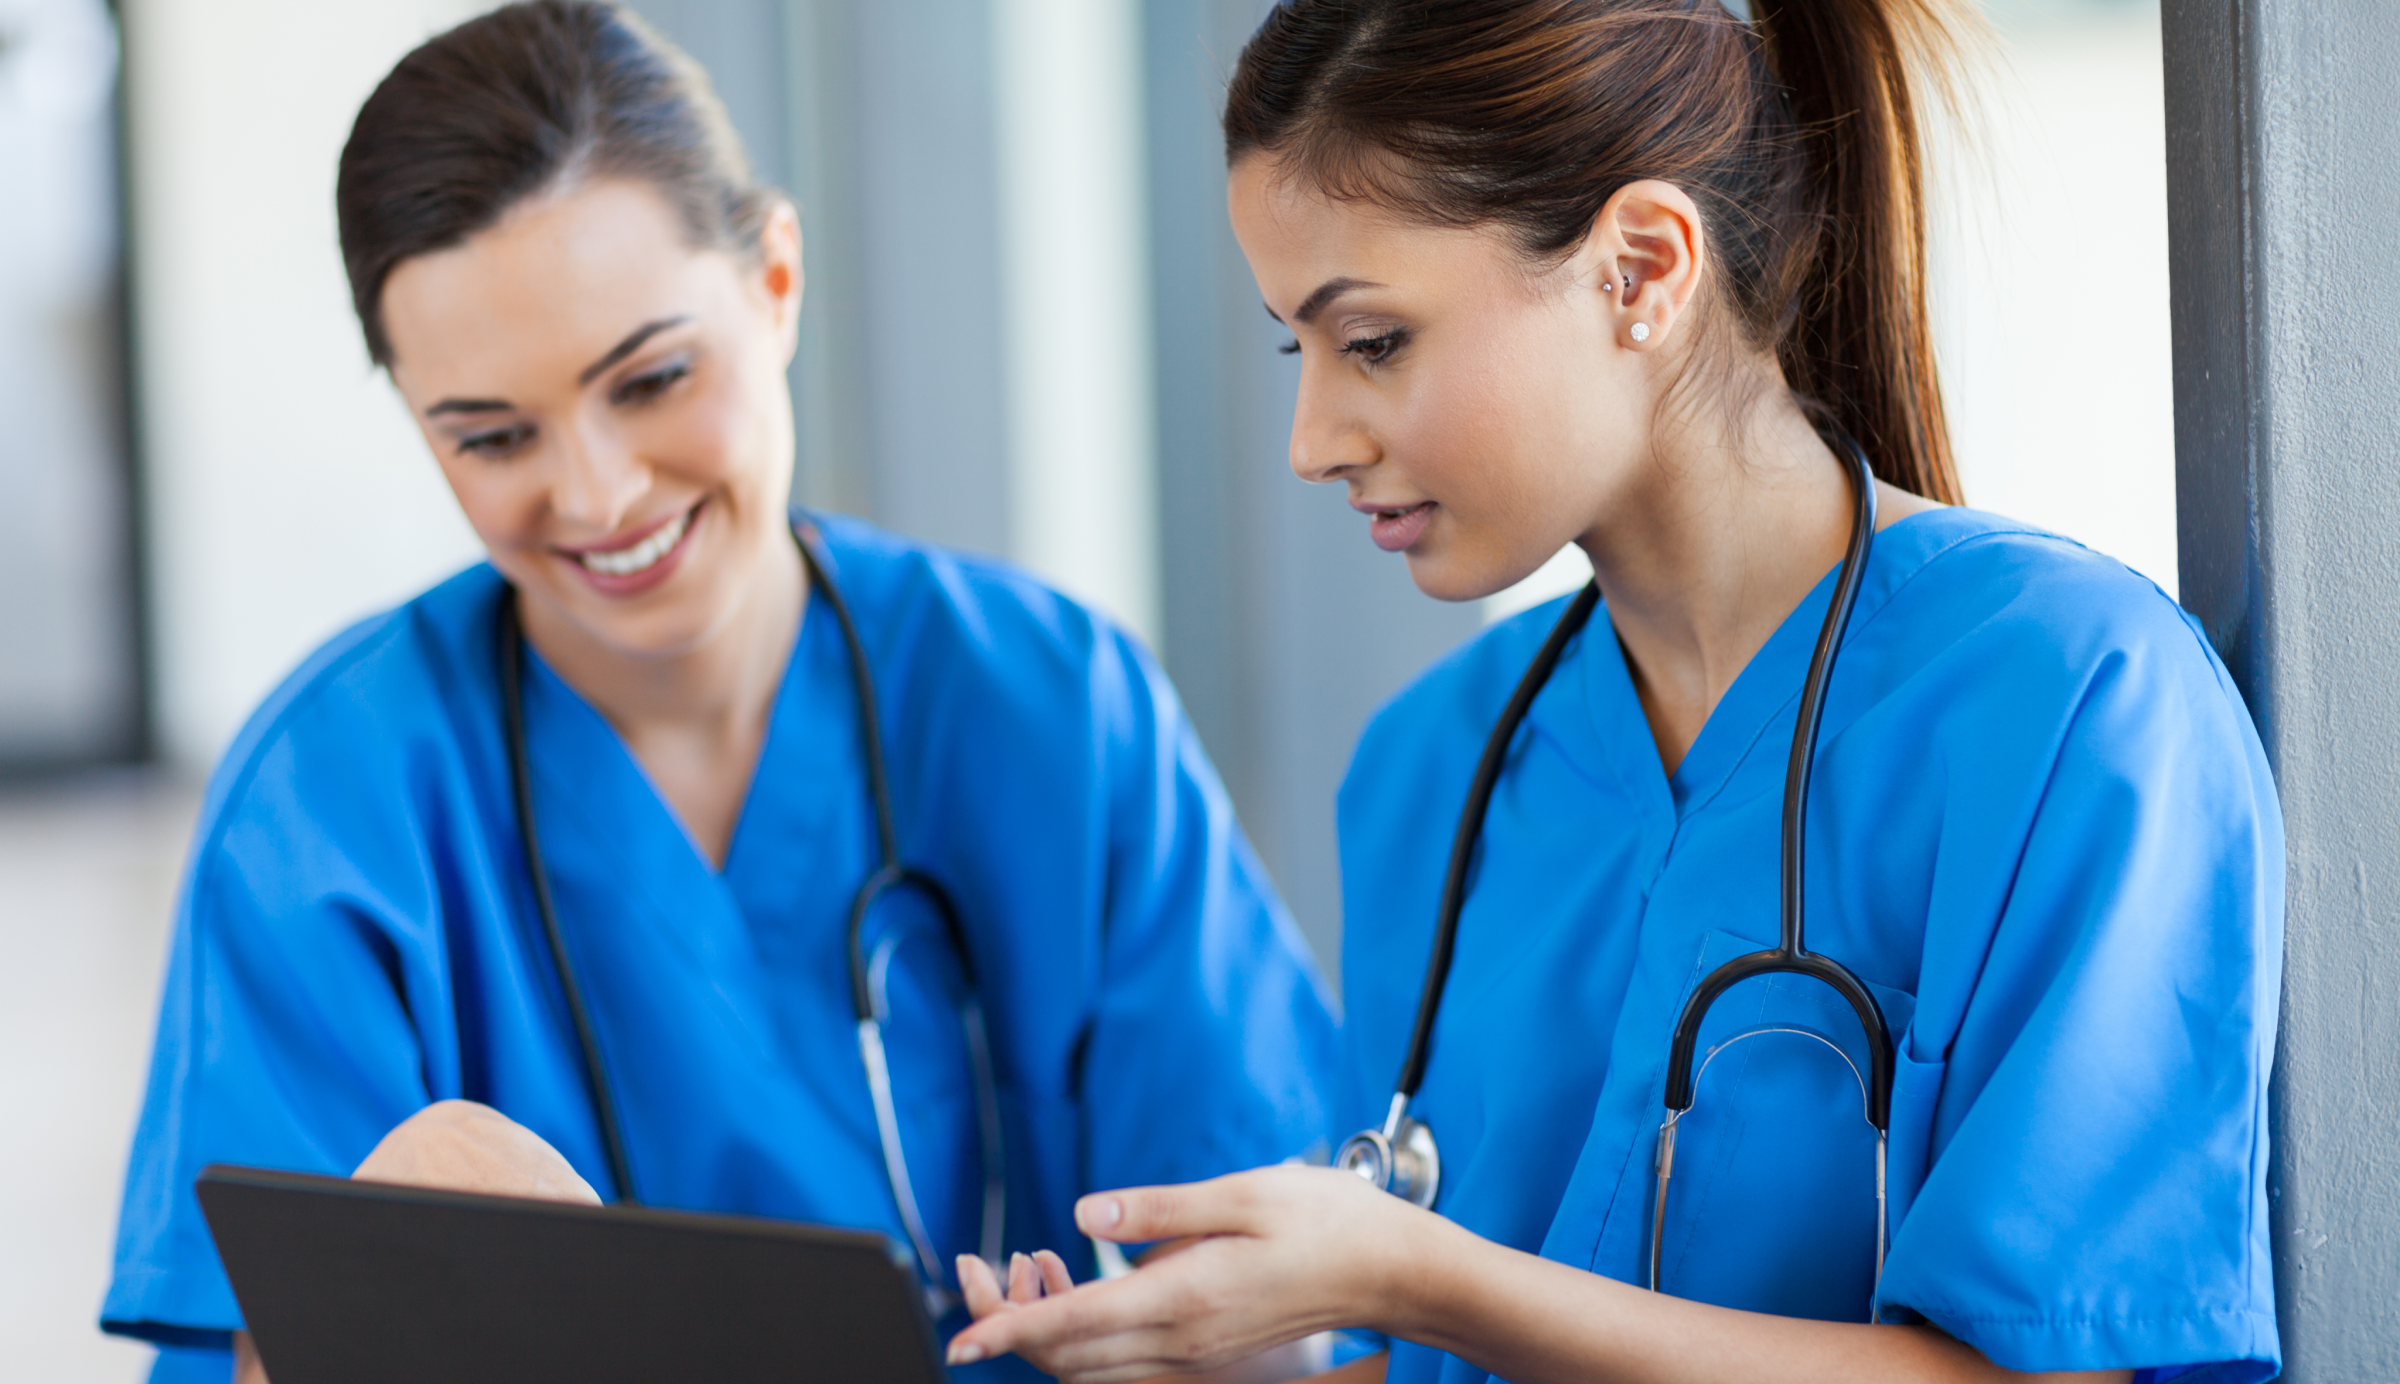 How to Improve New Nurses’ Teamwork & Communication Skills With Video Assessment